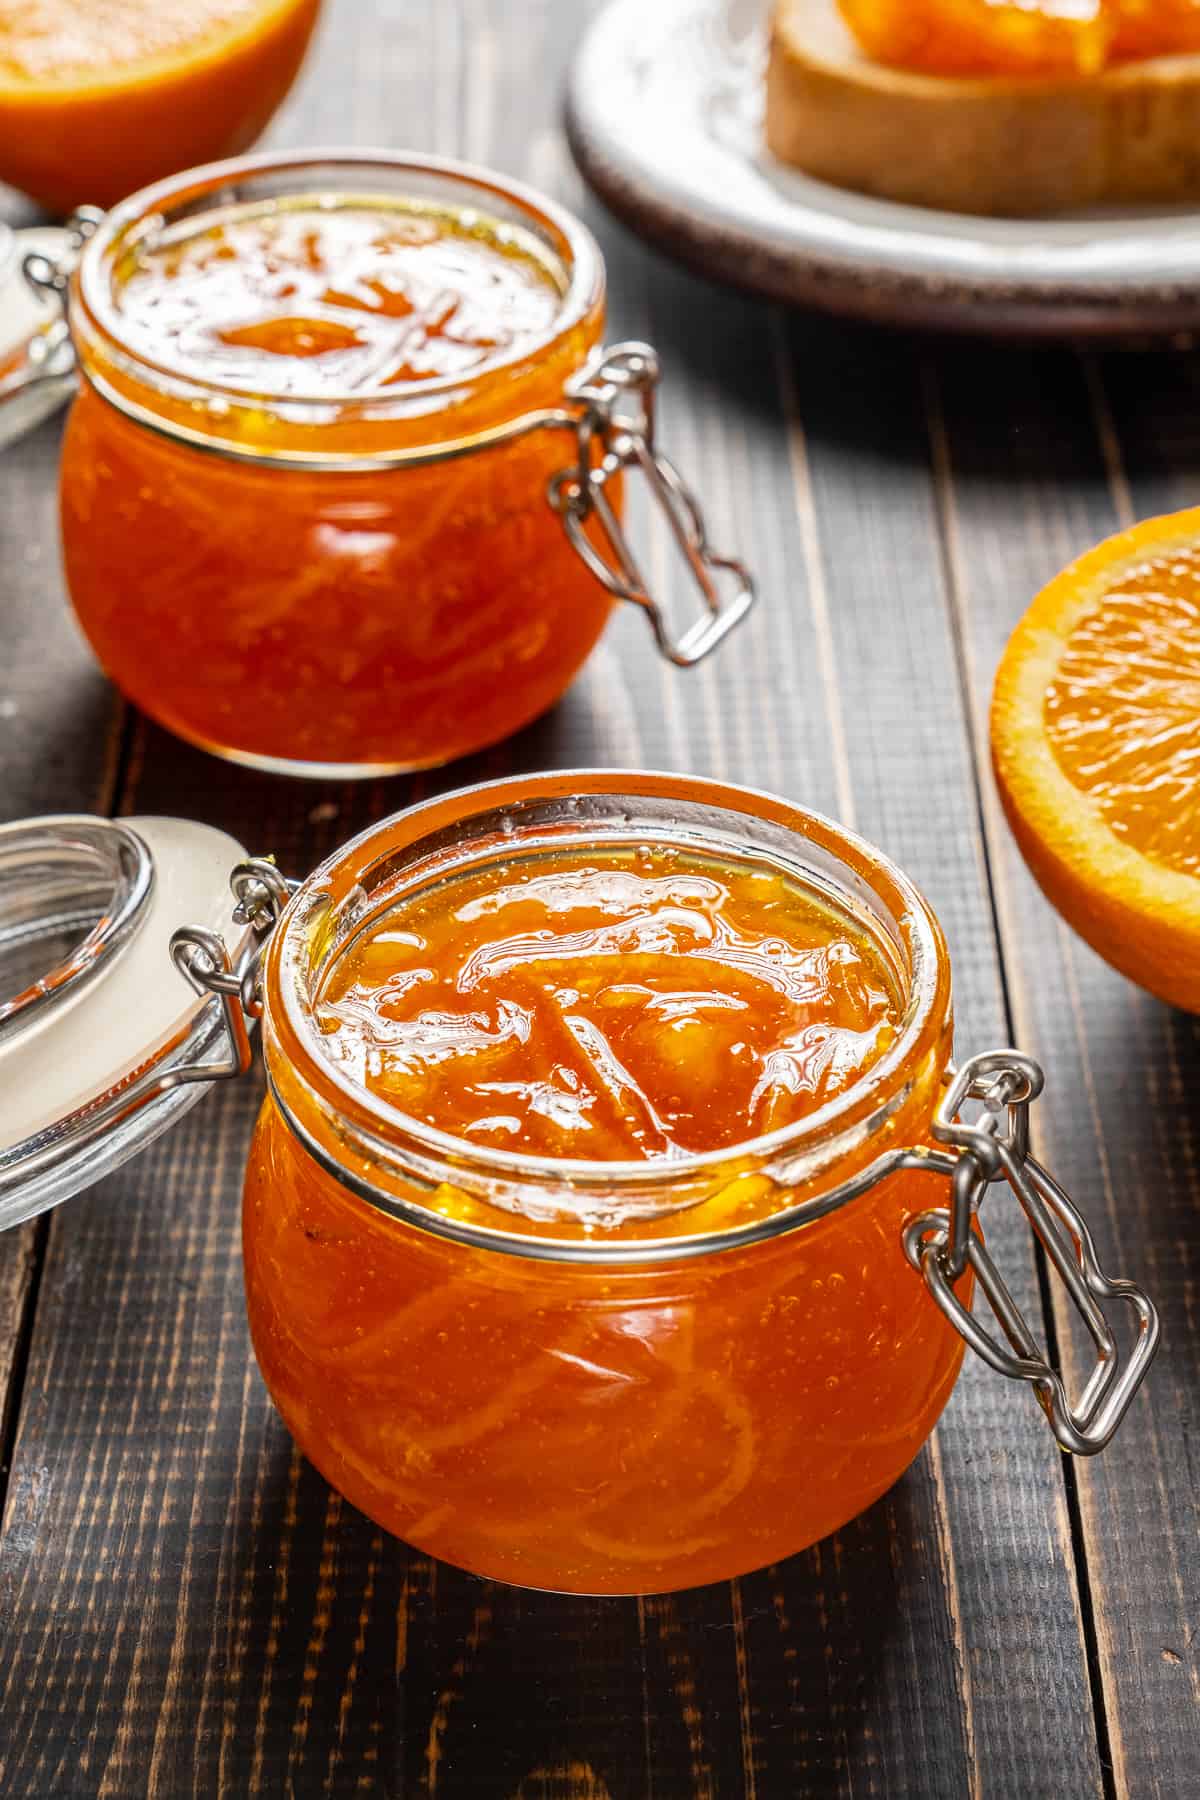 Orange marmalade in glass jars on a wooden background.